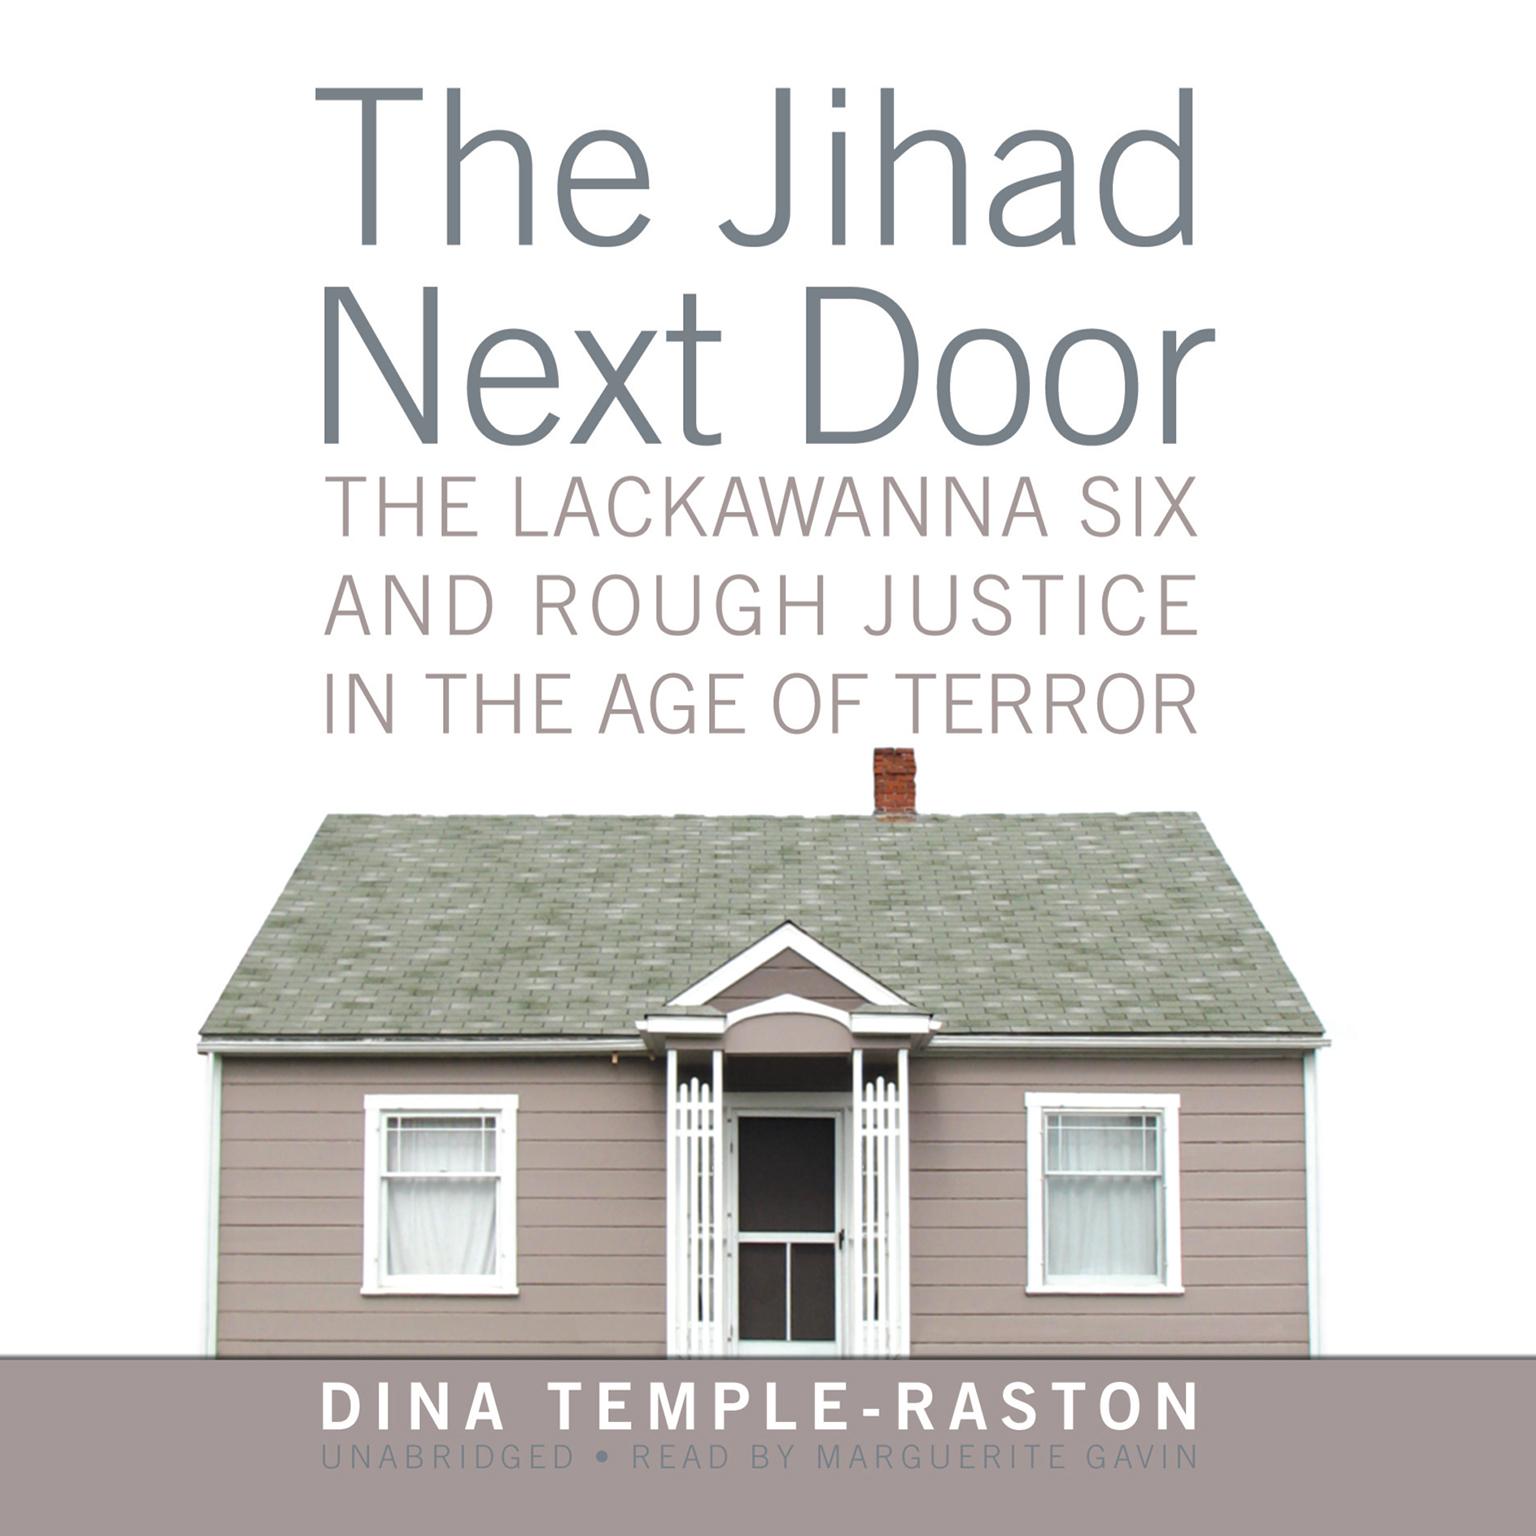 The Jihad Next Door: The Lackawanna Six and Rough Justice in the Age of Terror Audiobook, by Dina Temple-Raston